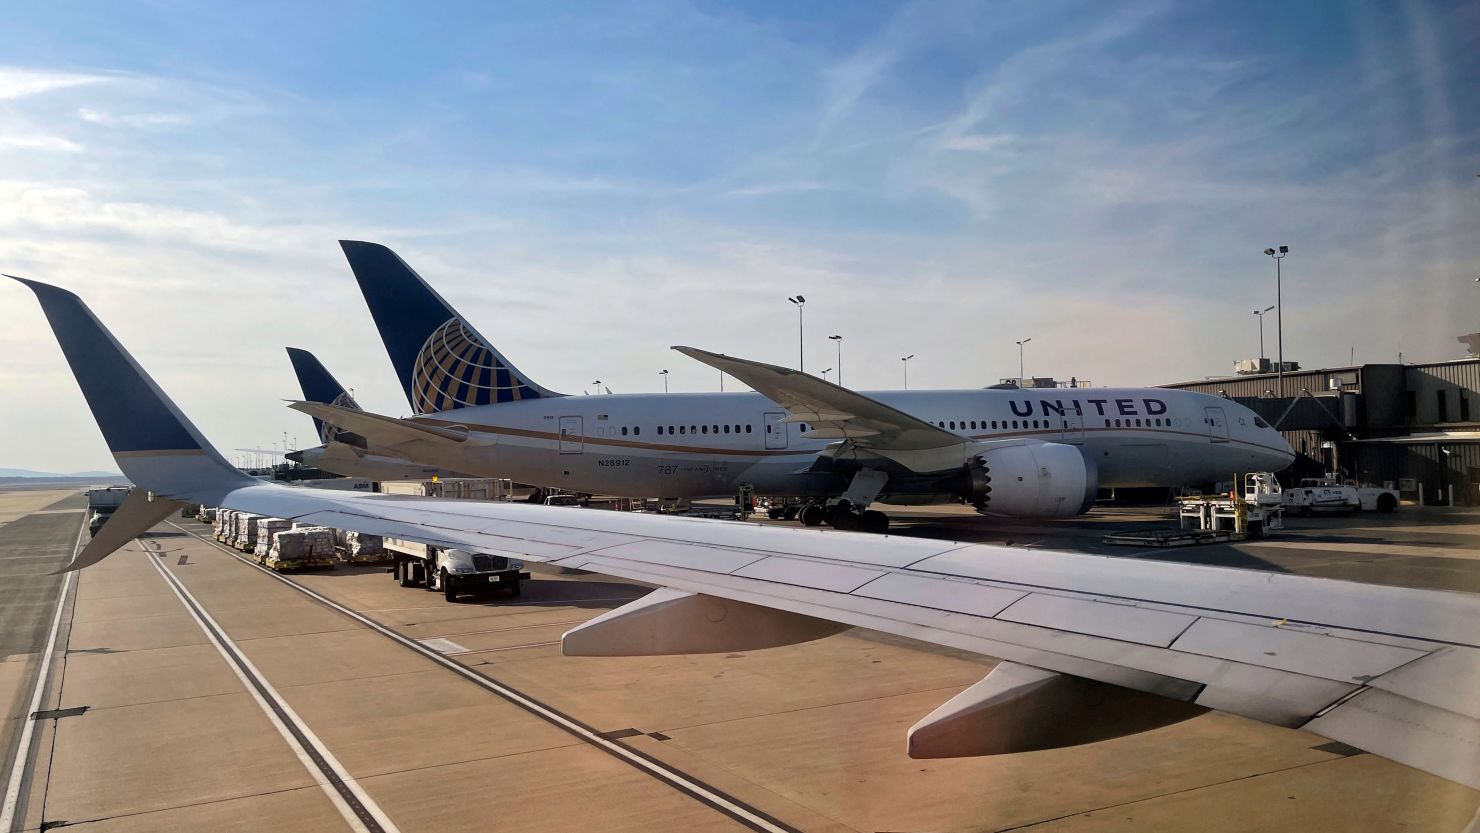 A United Airlines Boeing 787-8 Dreamliner seen at gate at Dulles Washington International airport (IAD) in Dulles, Virginia on March 12, 2021. (Photo by Daniel SLIM / AFP) (Photo by DANIEL SLIM/AFP via Getty Images)